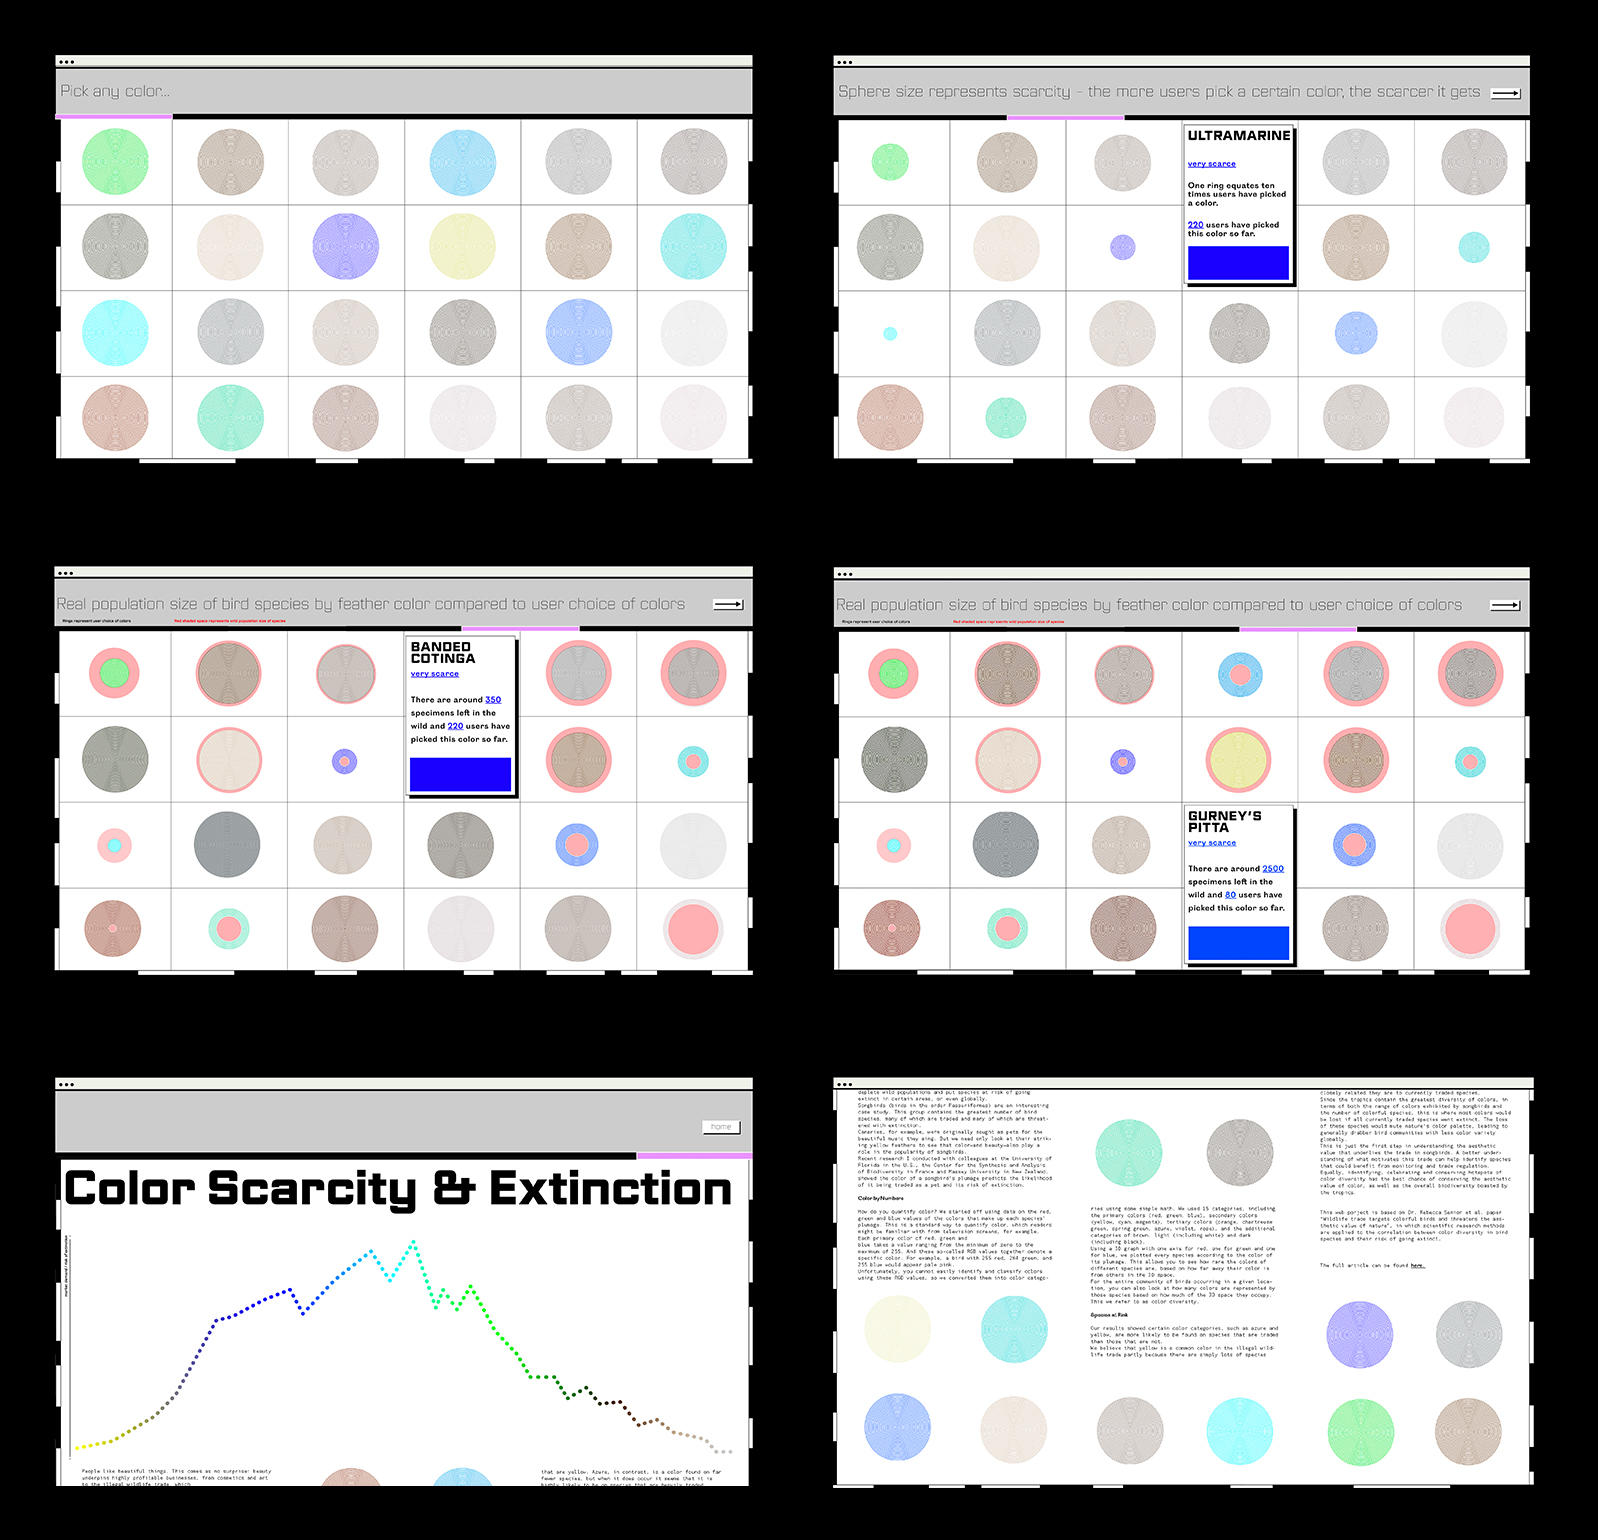 Interactive web design framework investigating the findings of research showing the positive statistical relationship between degree of color in birds and their risk of becoming extinct.